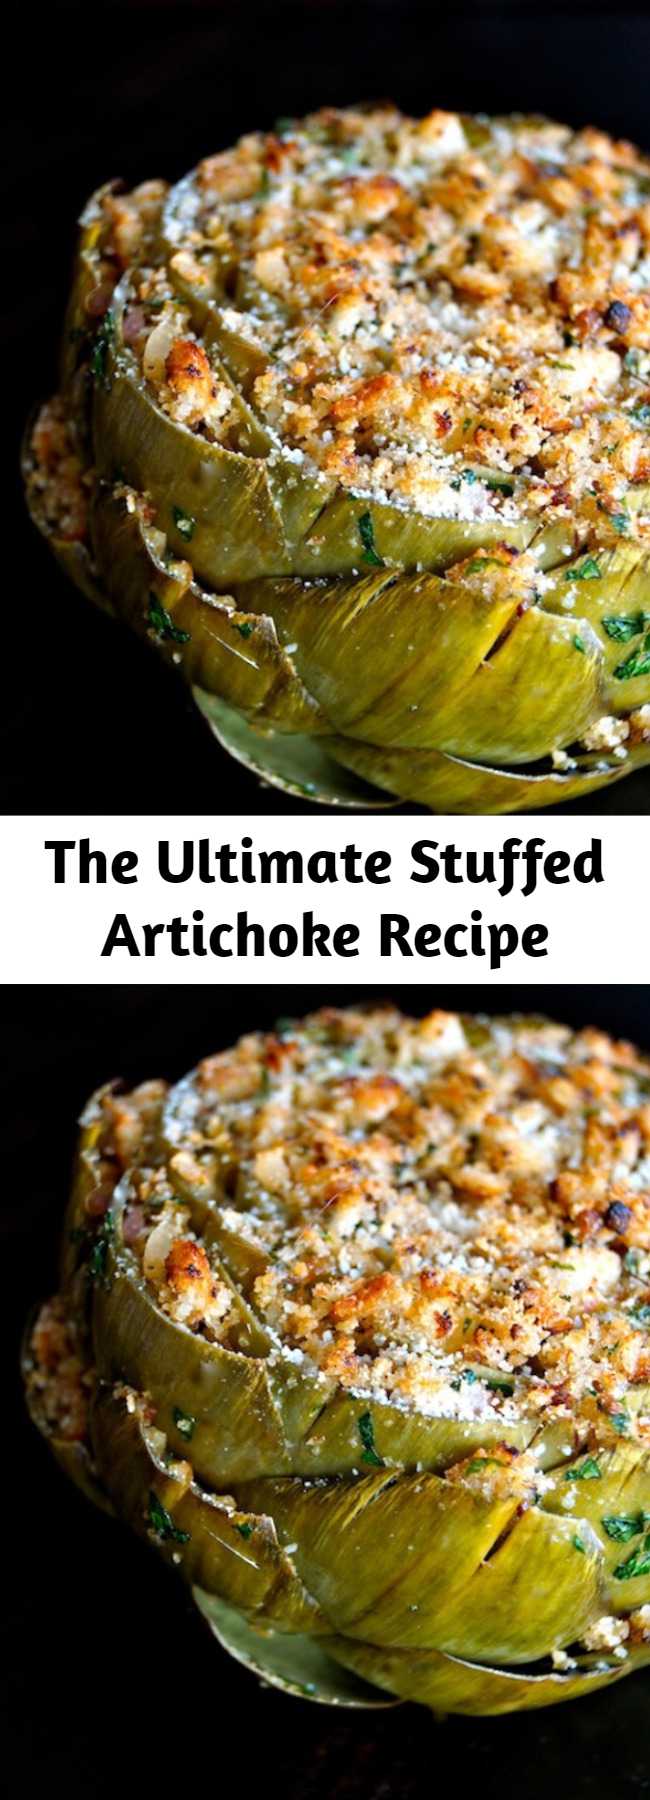 The Ultimate Stuffed Artichoke Recipe - This Ultimate Stuffed Artichoke Recipe is packed with incredible, aromatic flavors and is out of this world. Serve it for a scrumptious vegetarian first or main course. And it's great for sharing too!